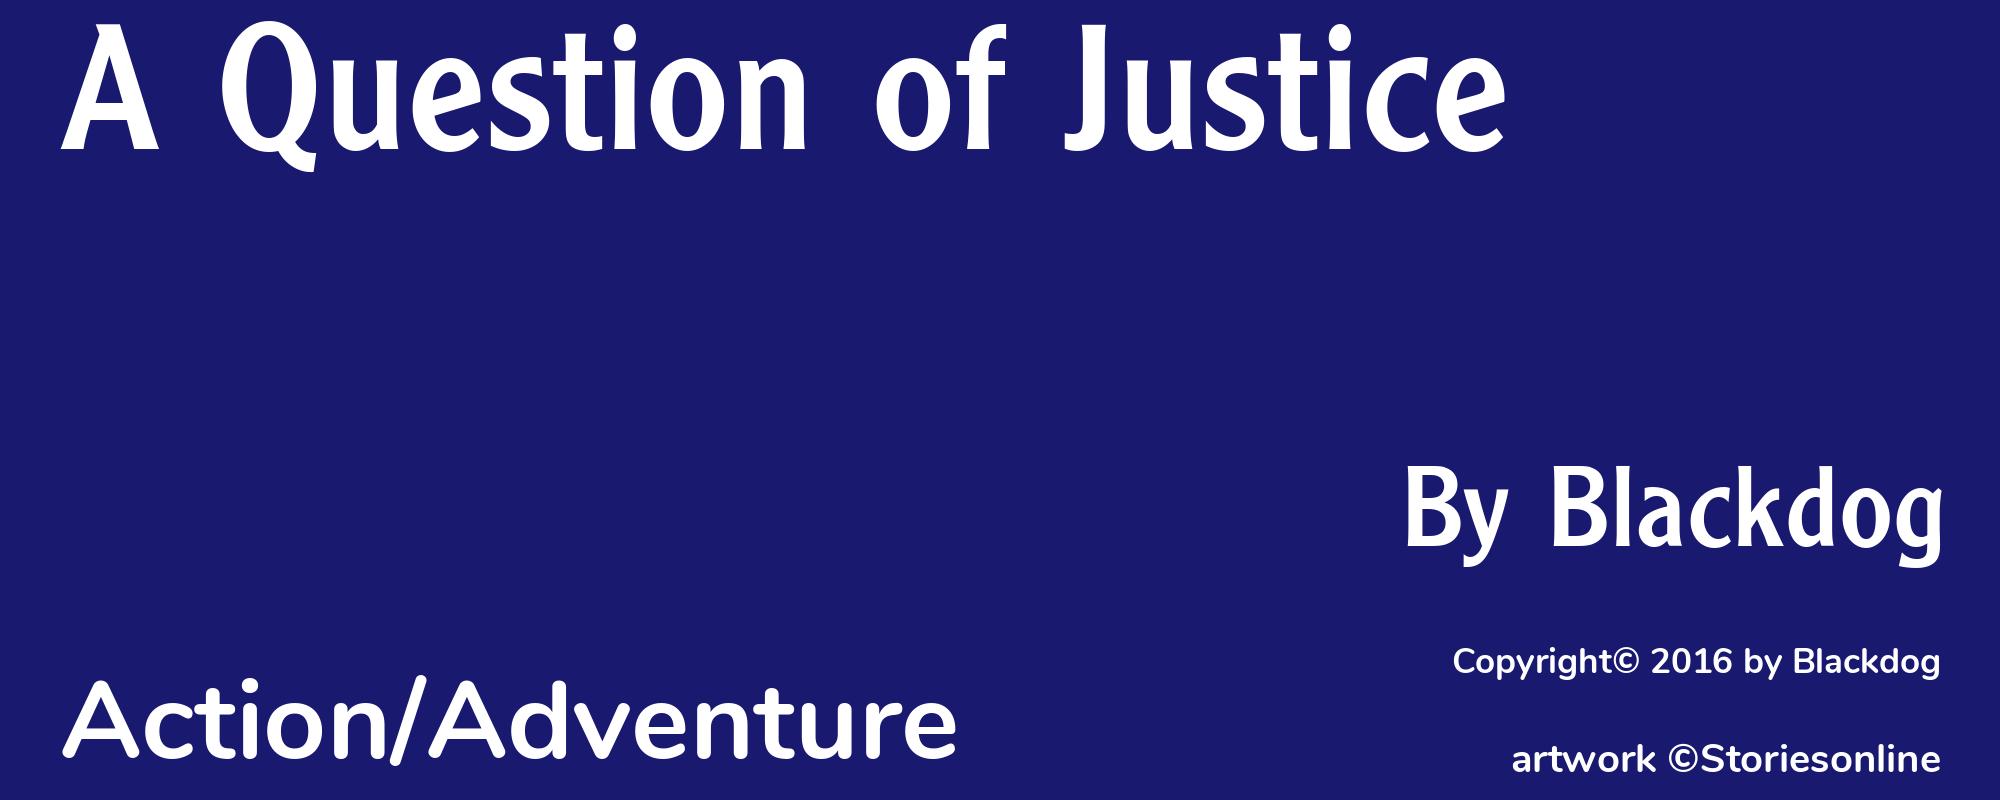 A Question of Justice - Cover